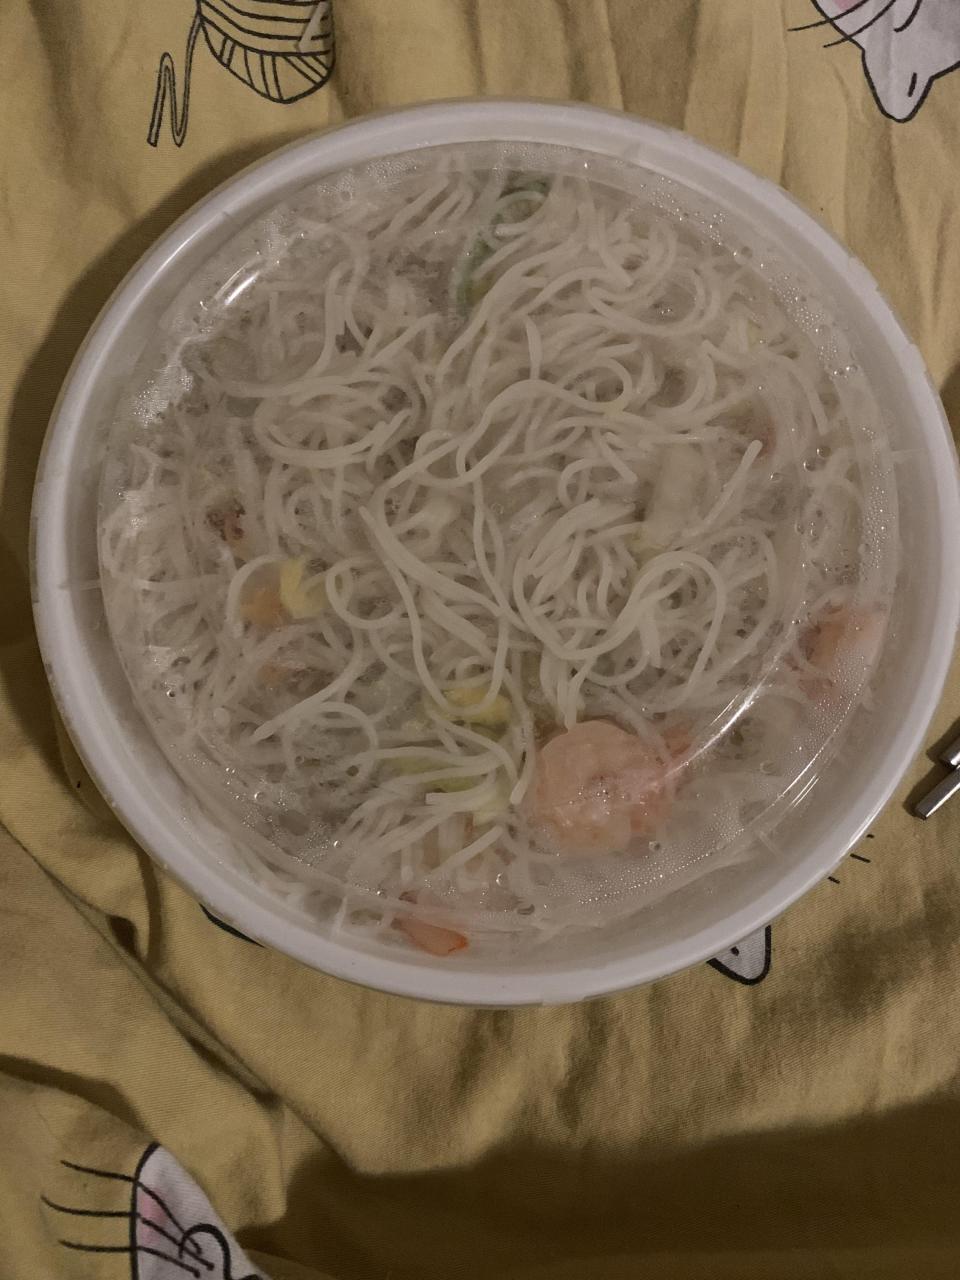 american style takeout container, white and circular with clear plastic lid, filled with noodles